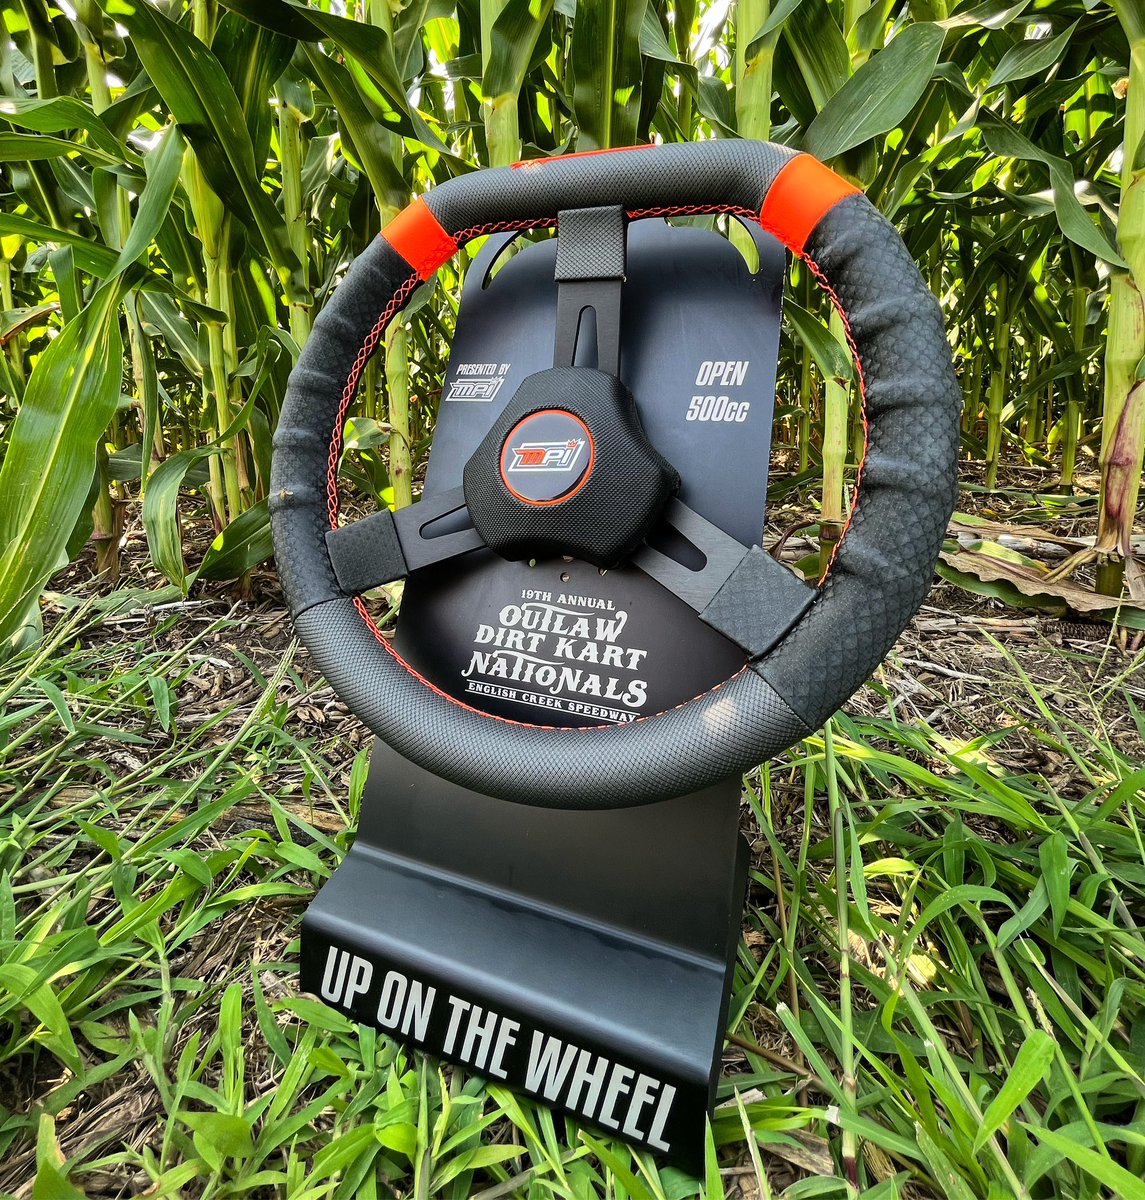 🟧 Who’s getting Up On The Wheel tonight? 🟧

This trophy is going to the 500cc Open class hard charger out at English Creek Speedway for the Outlaw Dirt Kart Nationals 🏁

#ispympi #mpidifference #mpi #mpifamily #knoxvillenationals